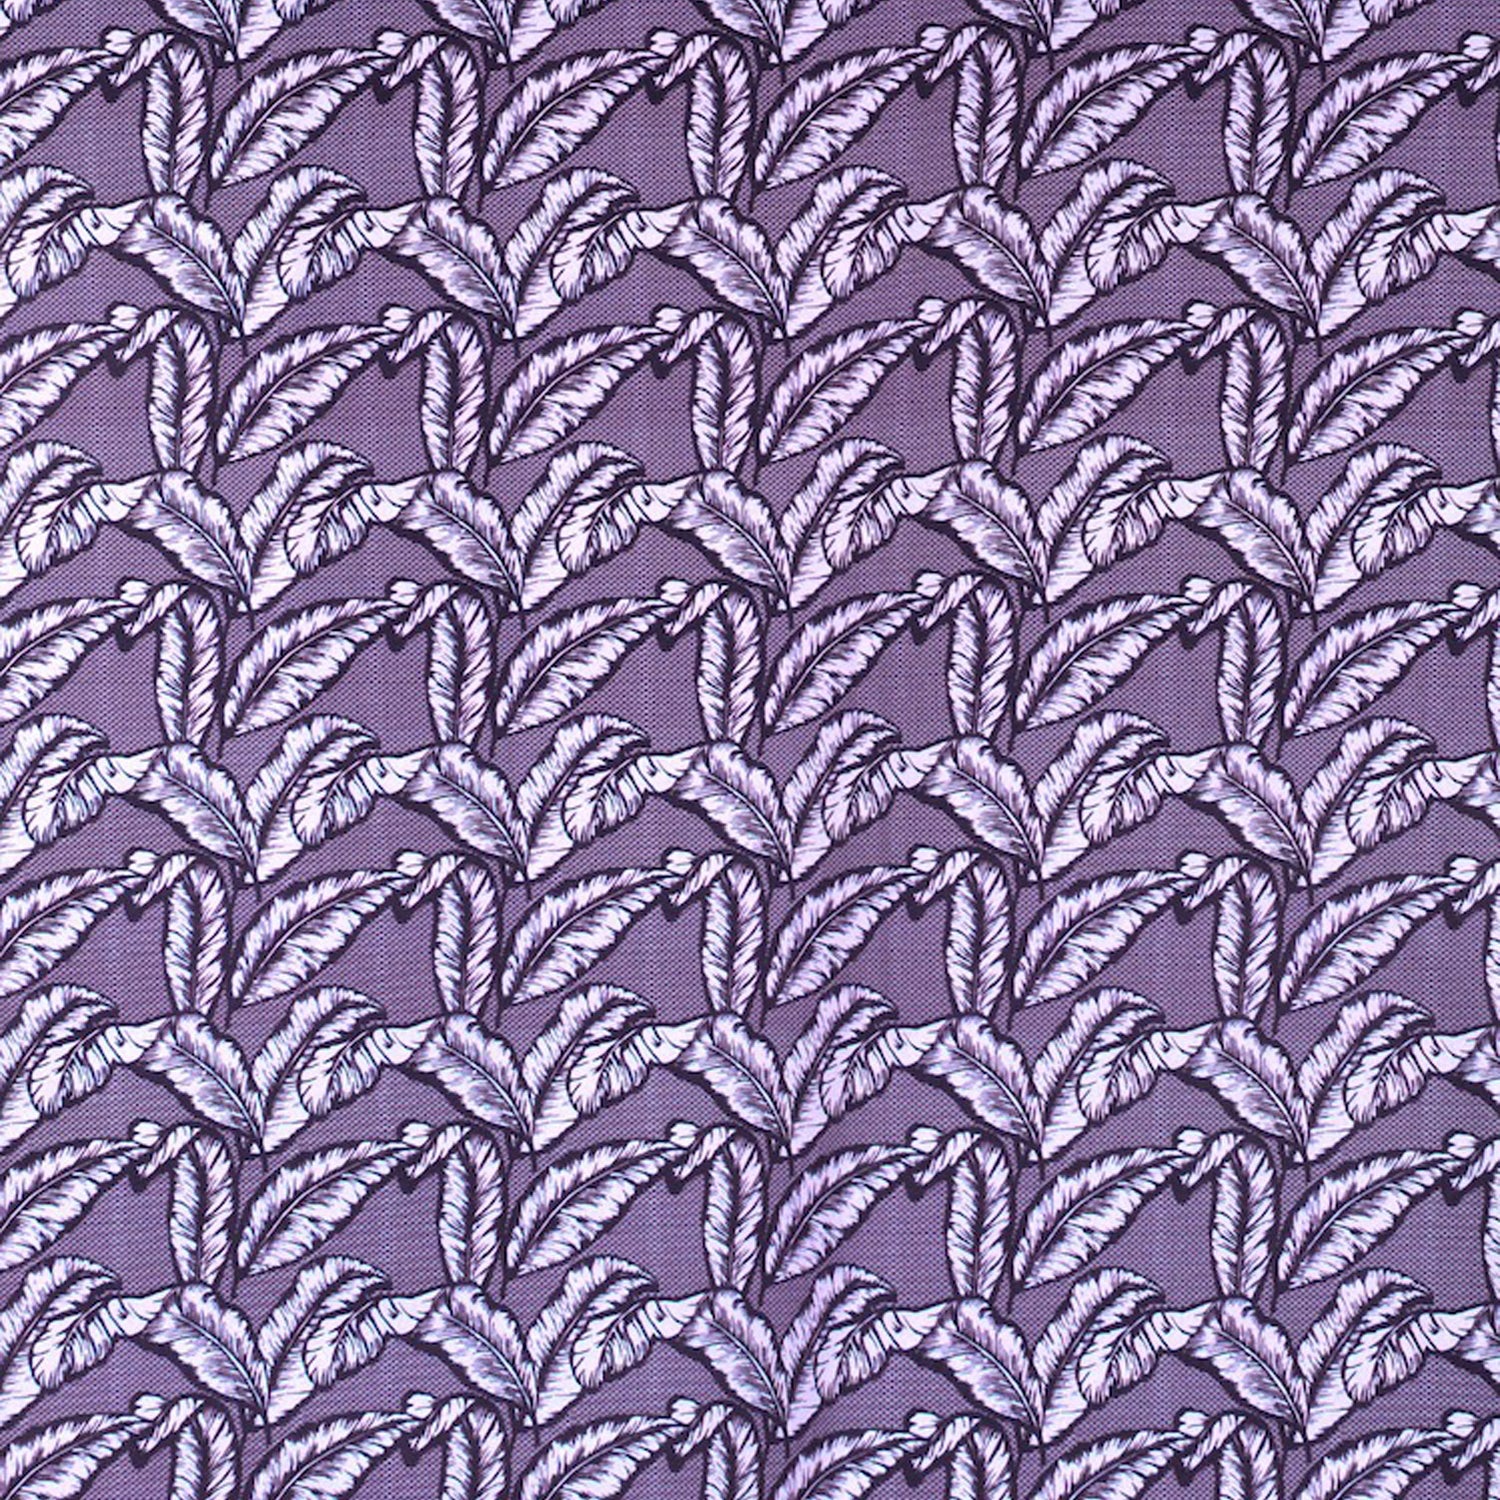 Detail of fabric in a dense leaf print in shades of purple on a purple field.